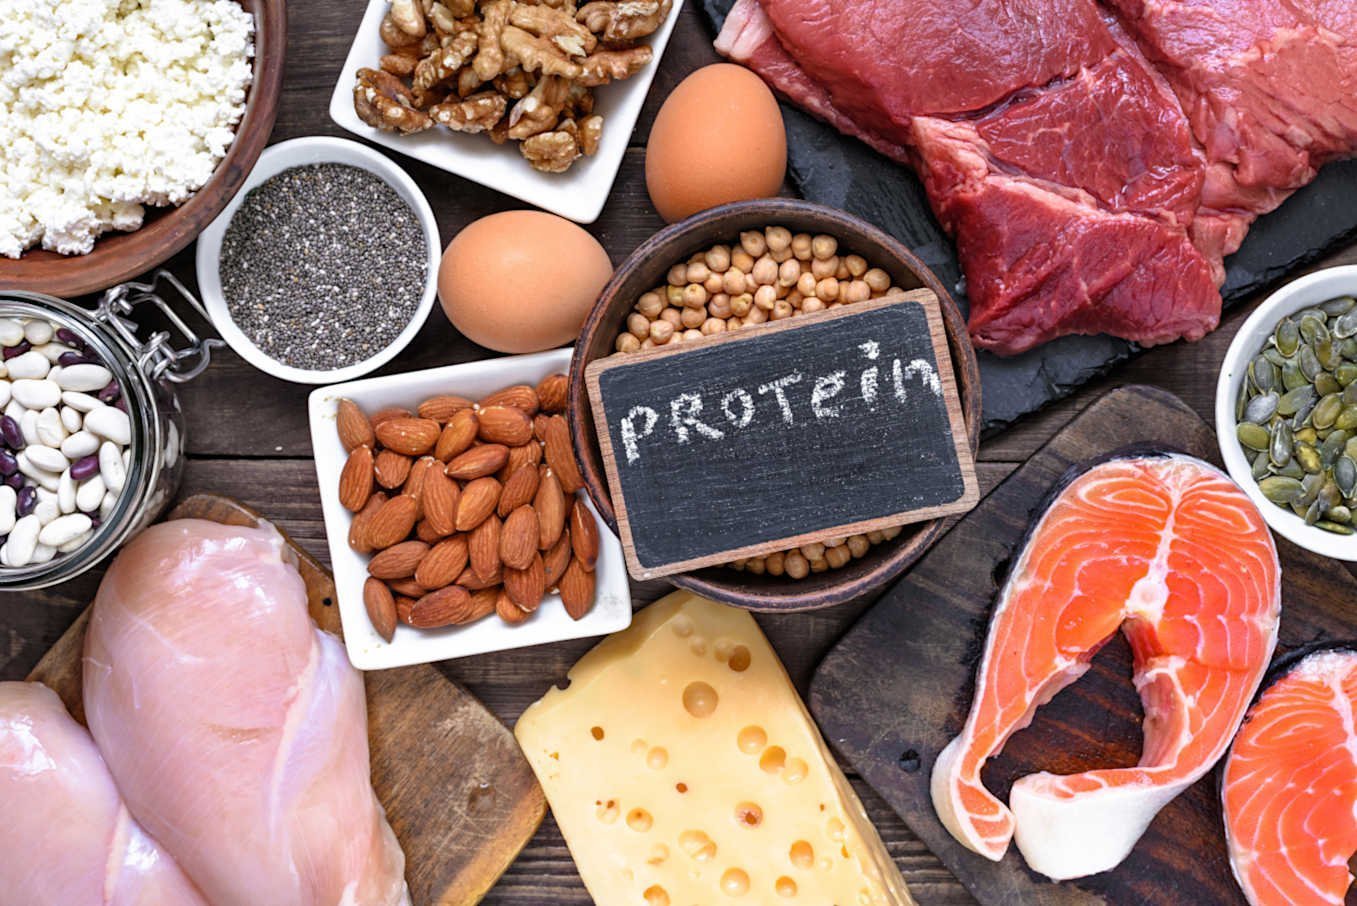 Protein as the main food group for gaining muscle mass